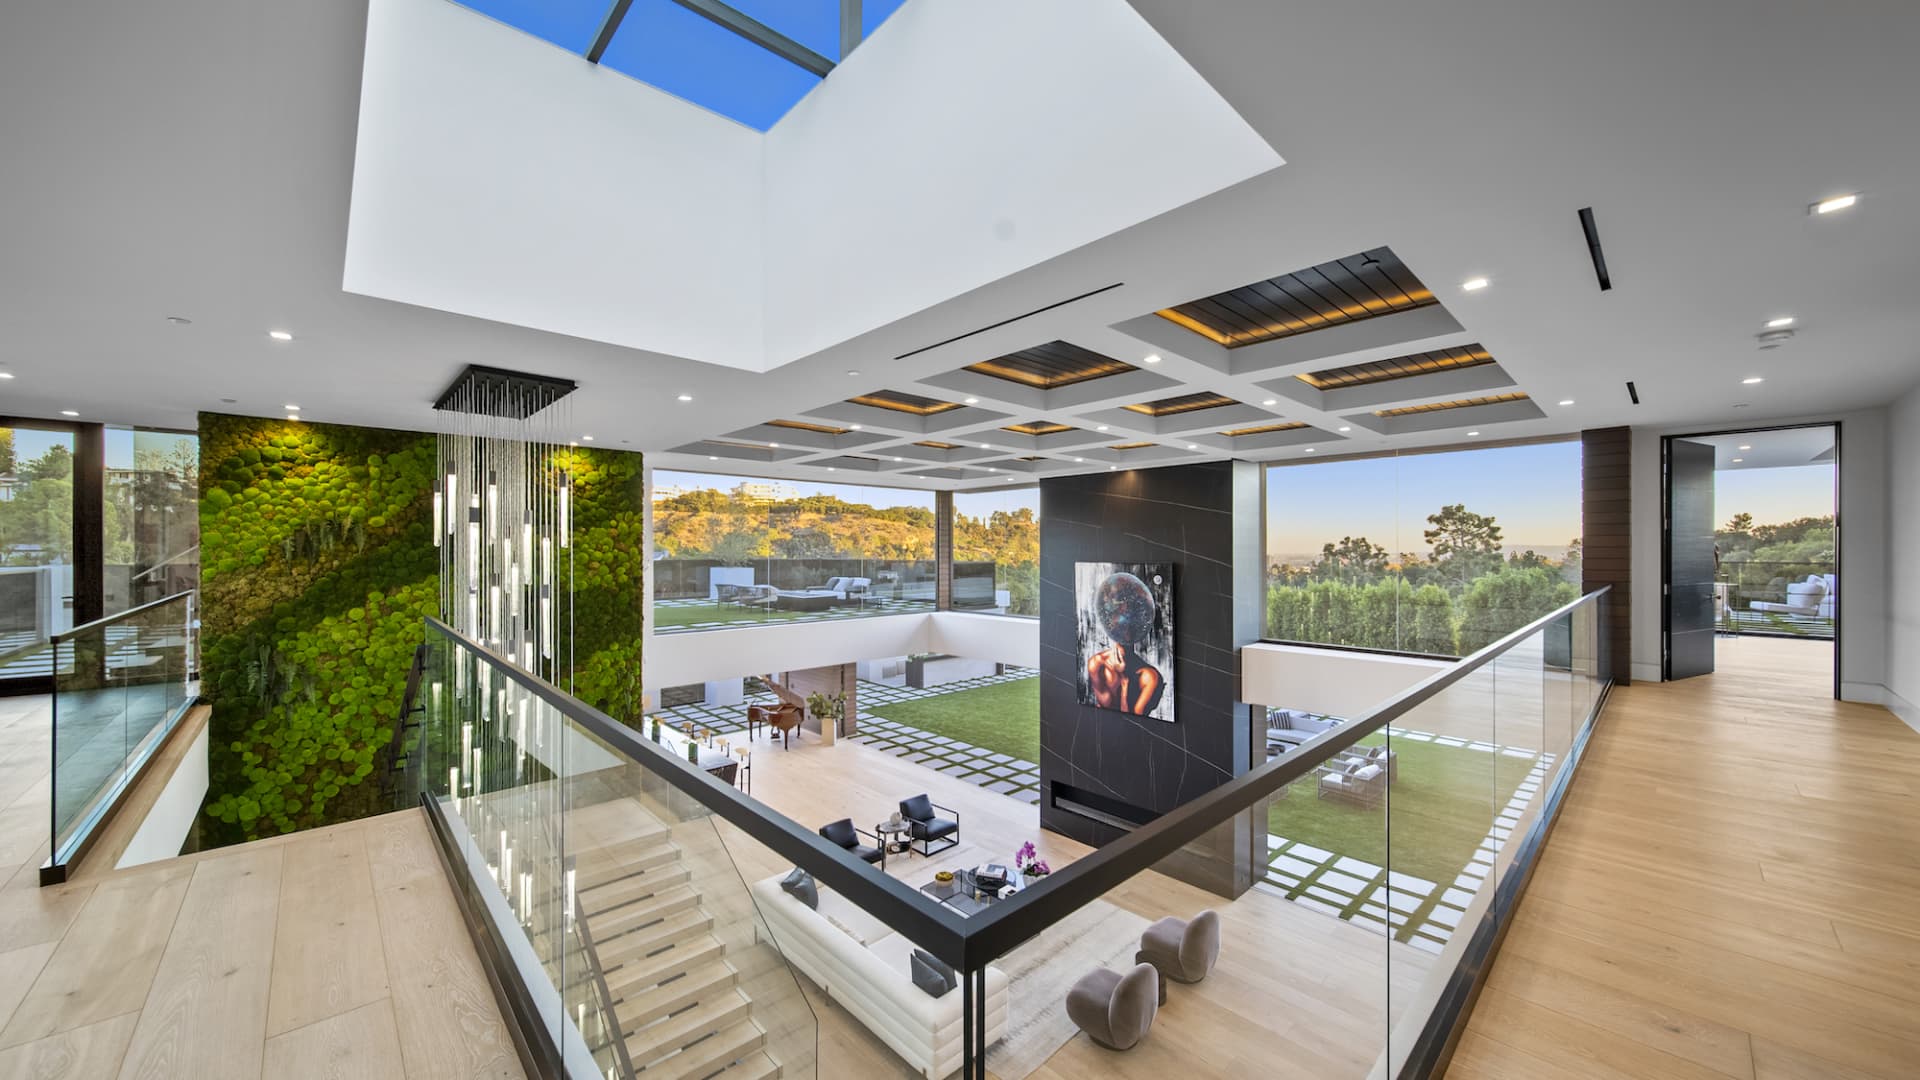 The grand living area opens to the outdoors with 22 foot ceilings, a 10-ft long fireplace, and a giant wall covered in living green moss that extends across three levels of the home.